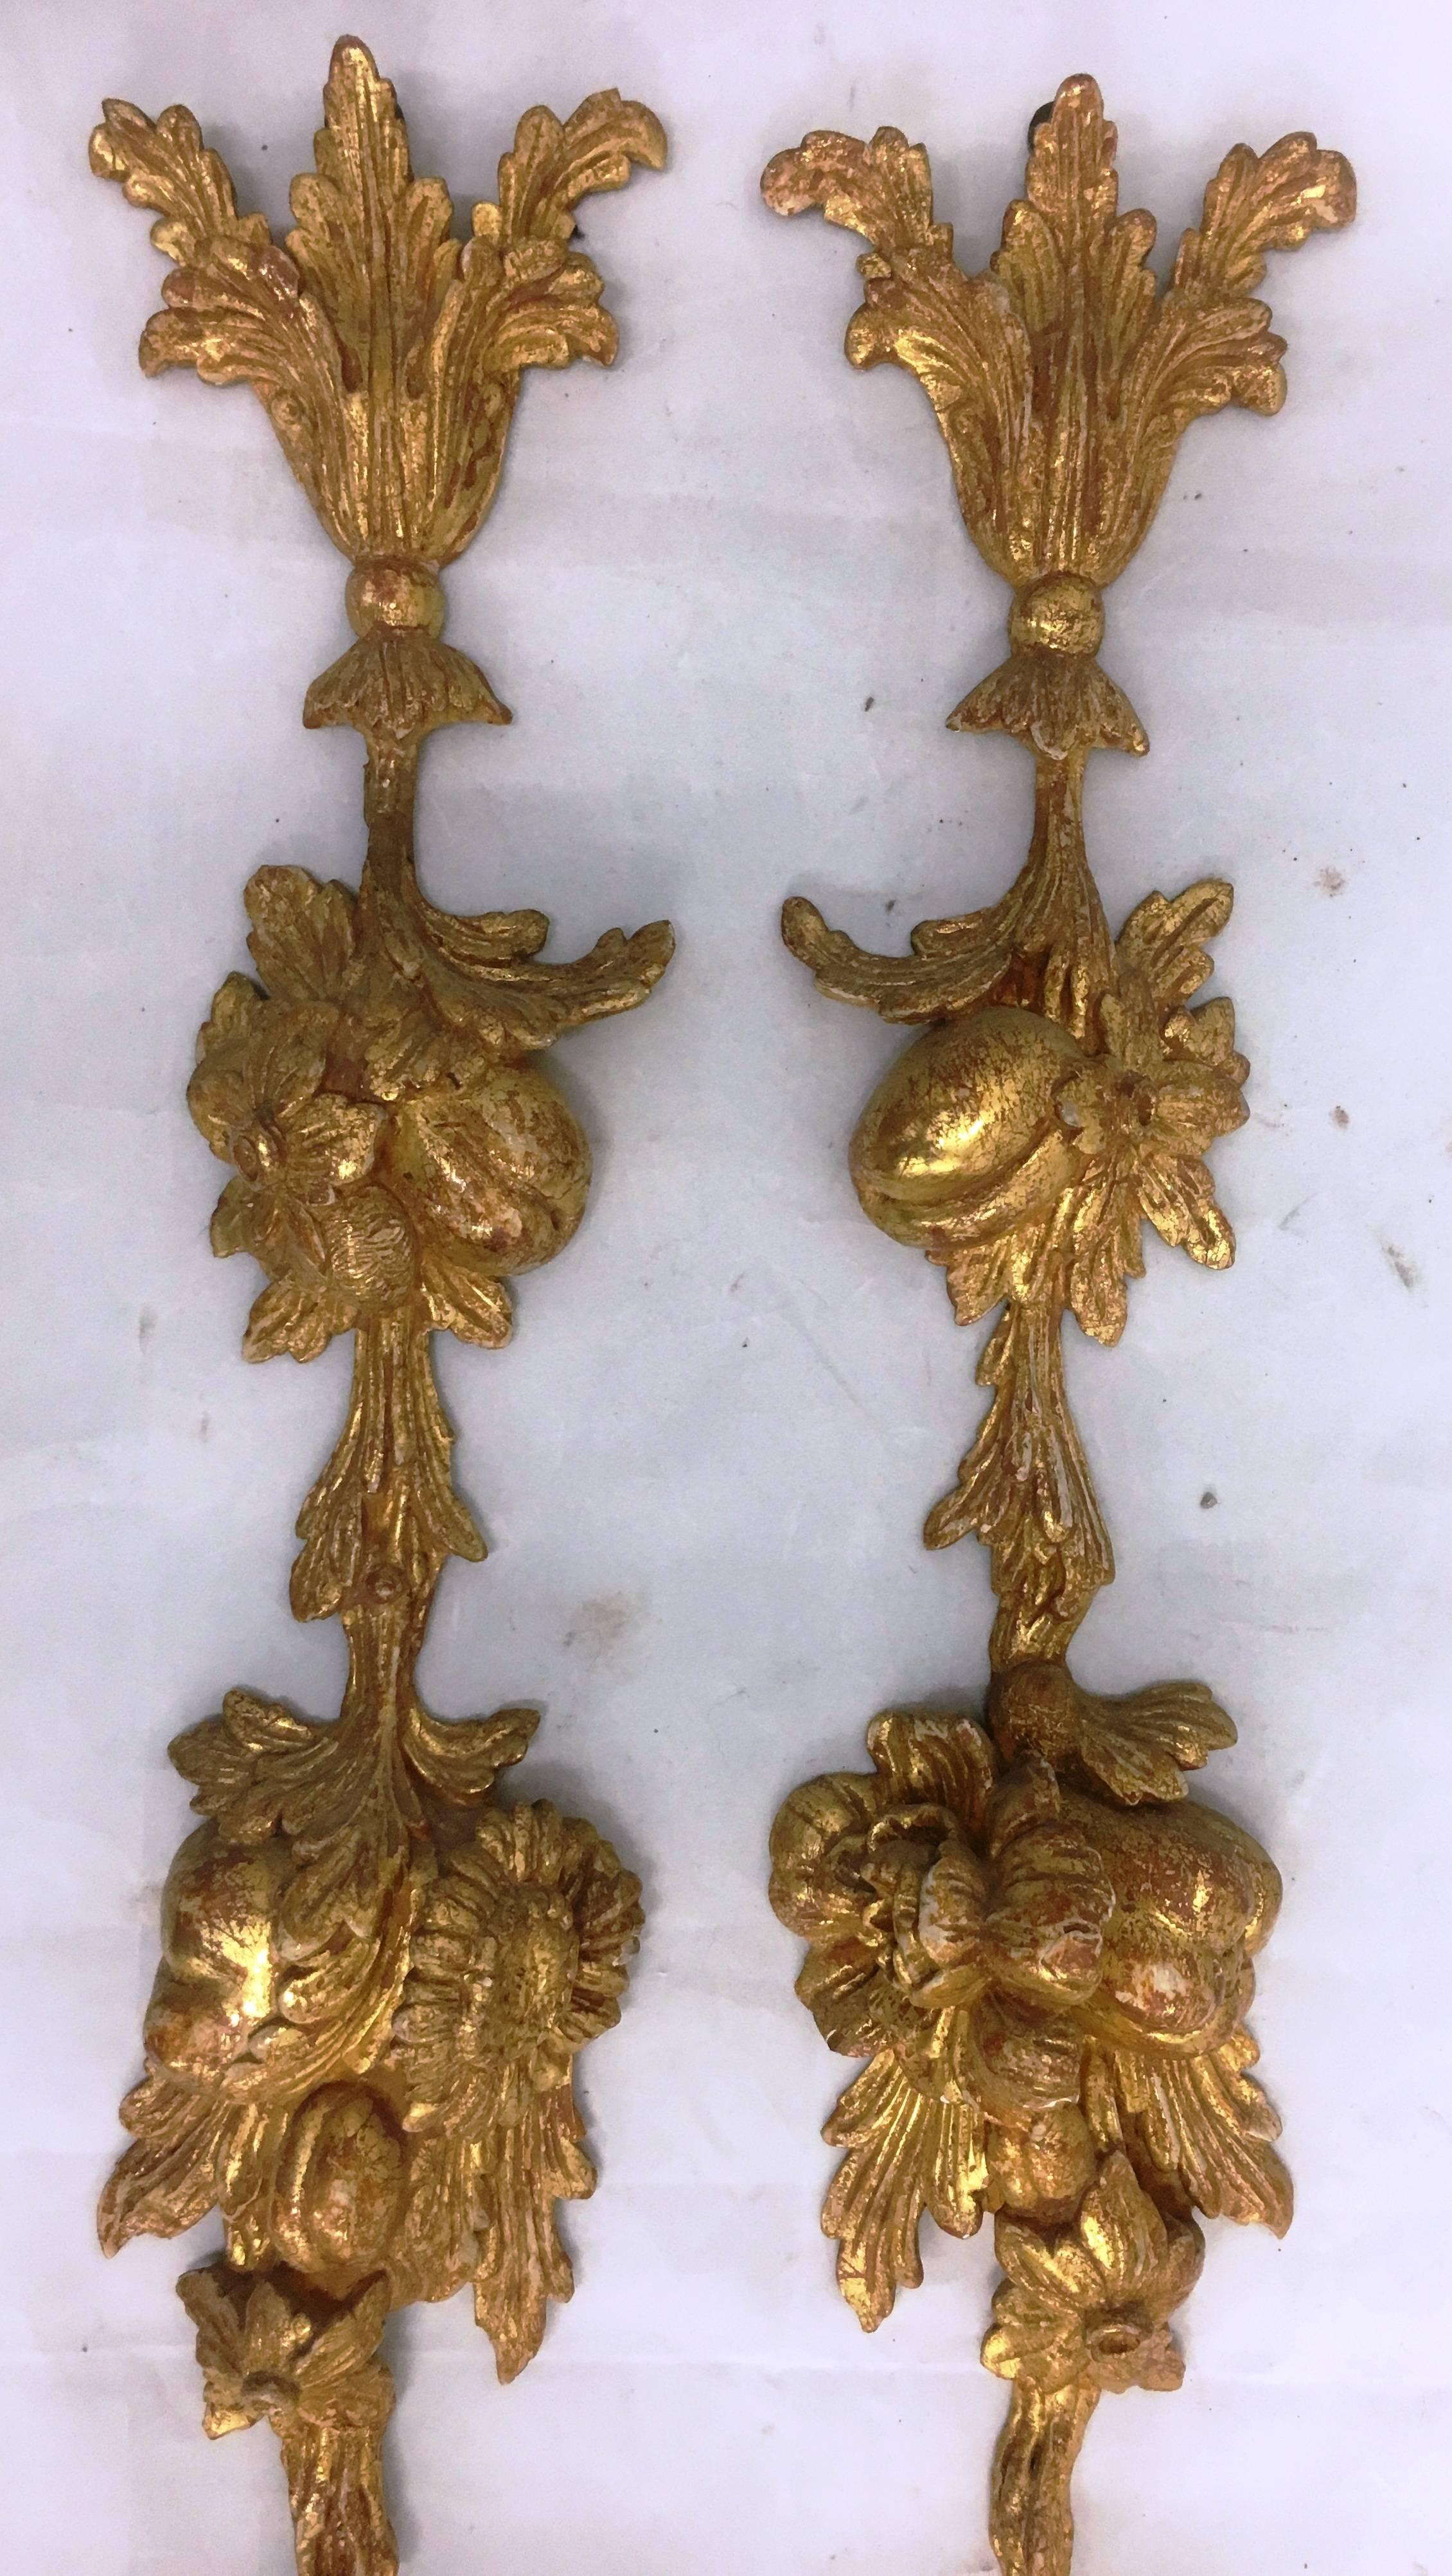 English Pair of 18th Century Carved Giltwood Wall Appliques